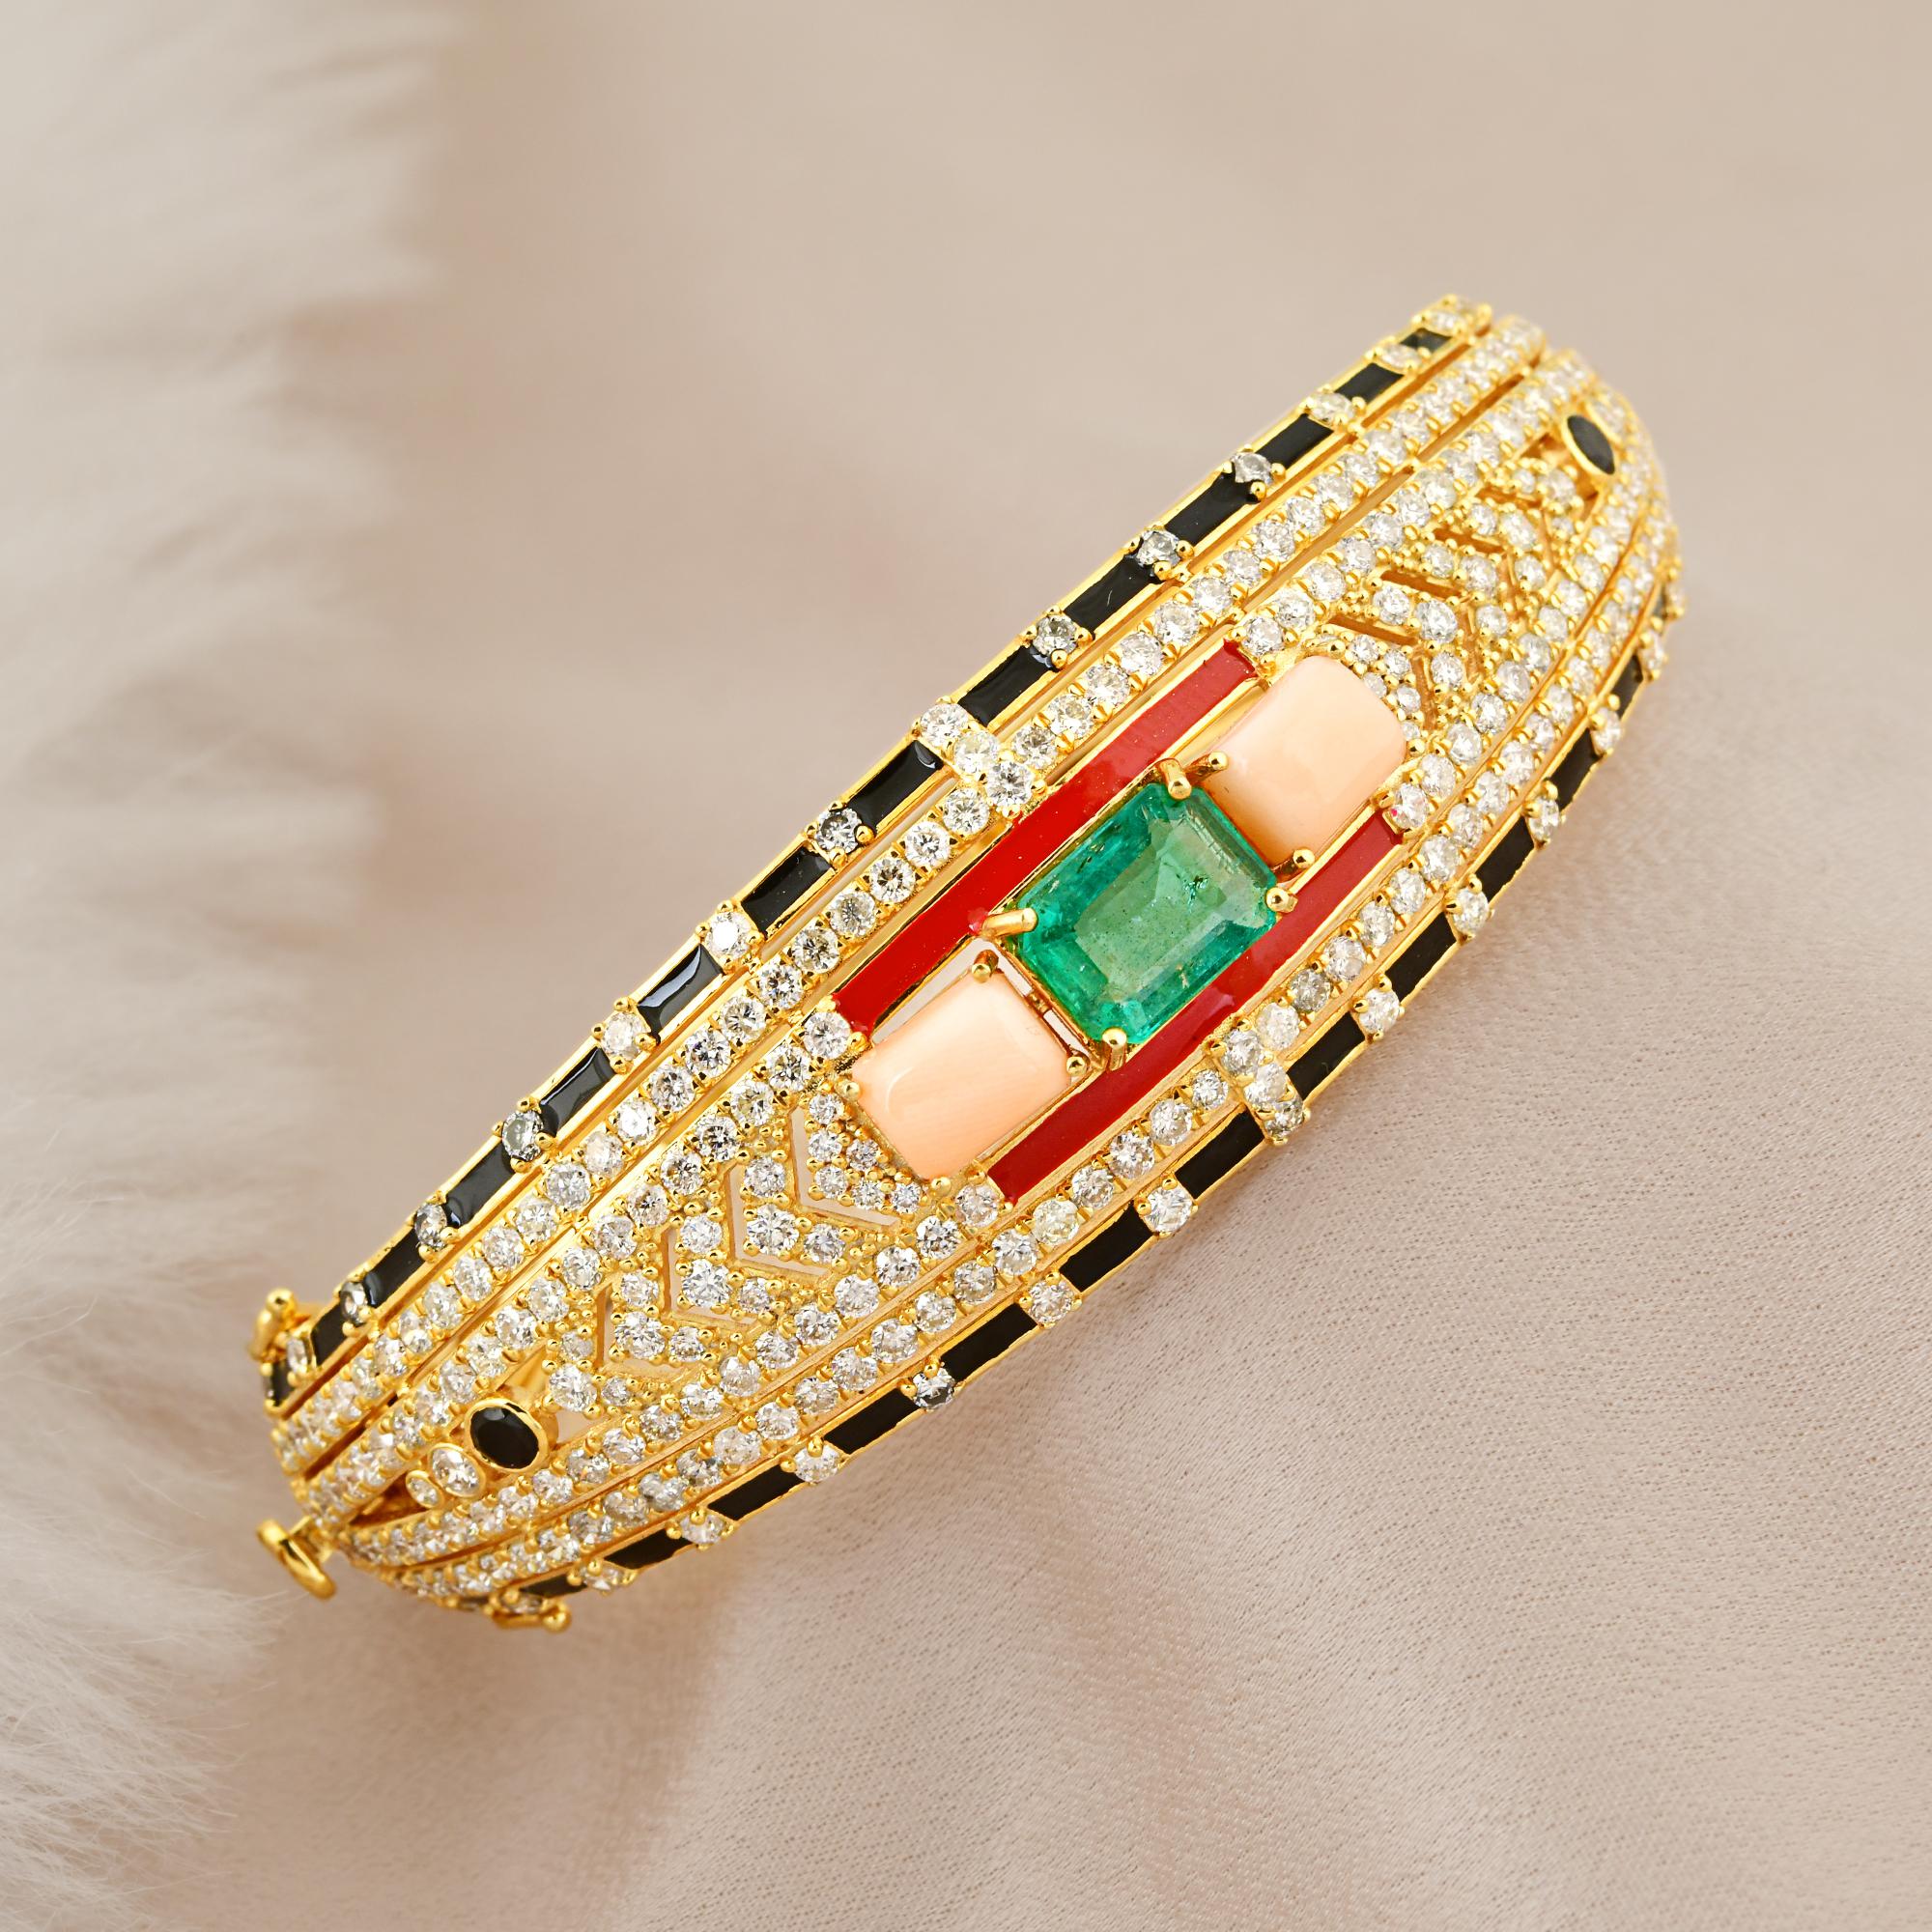 Introducing the exquisite Black Onyx Coral Emerald Bangle Bracelet in 18k Yellow Gold with Diamond accents and Enamel detailing. This bracelet is a true work of art, combining bold gemstones, luxurious gold, and intricate enamel work to create a